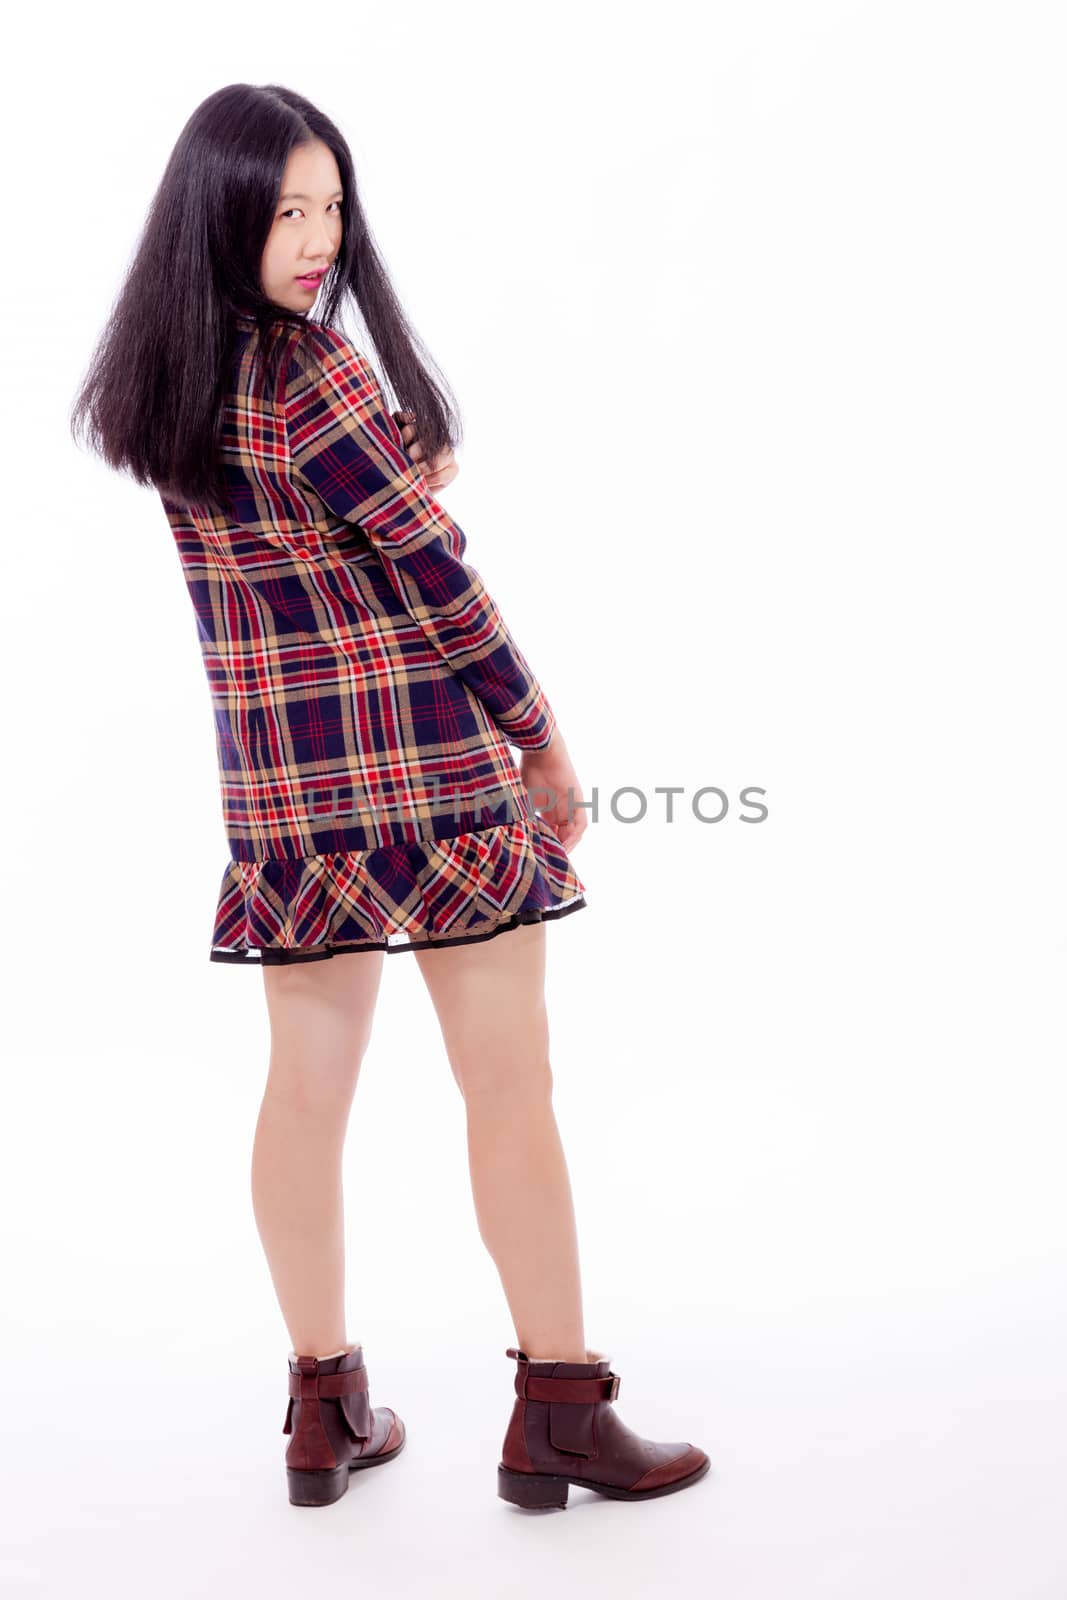 Chinese teenager standing, looking over shoulder at camera